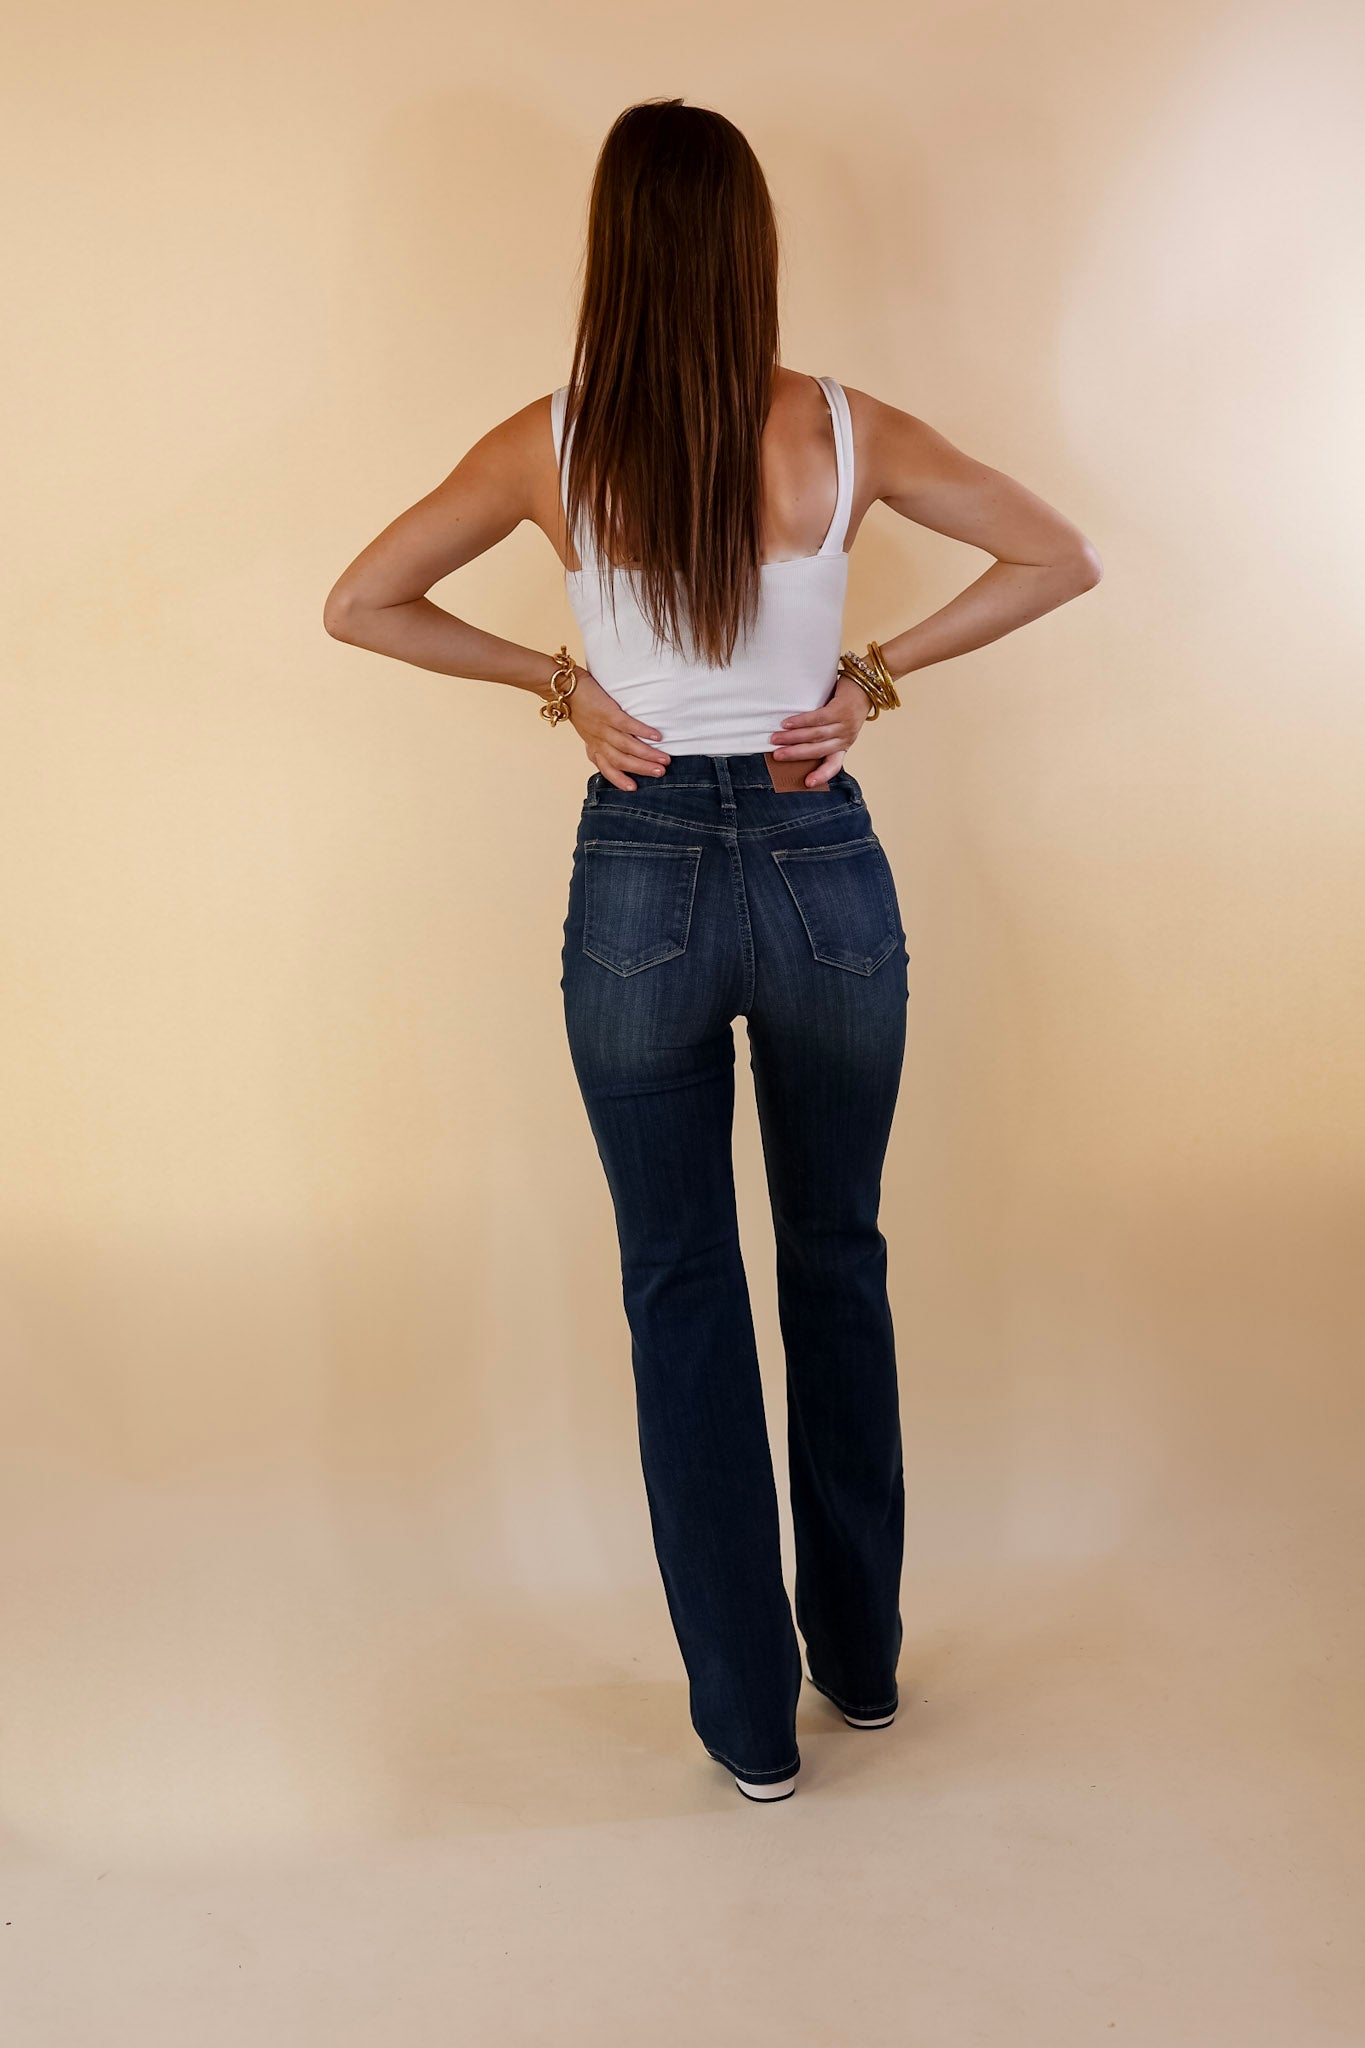 Judy Blue | Song On Repeat Elastic Pull On Bootcut Jeans in Dark Wash - Giddy Up Glamour Boutique